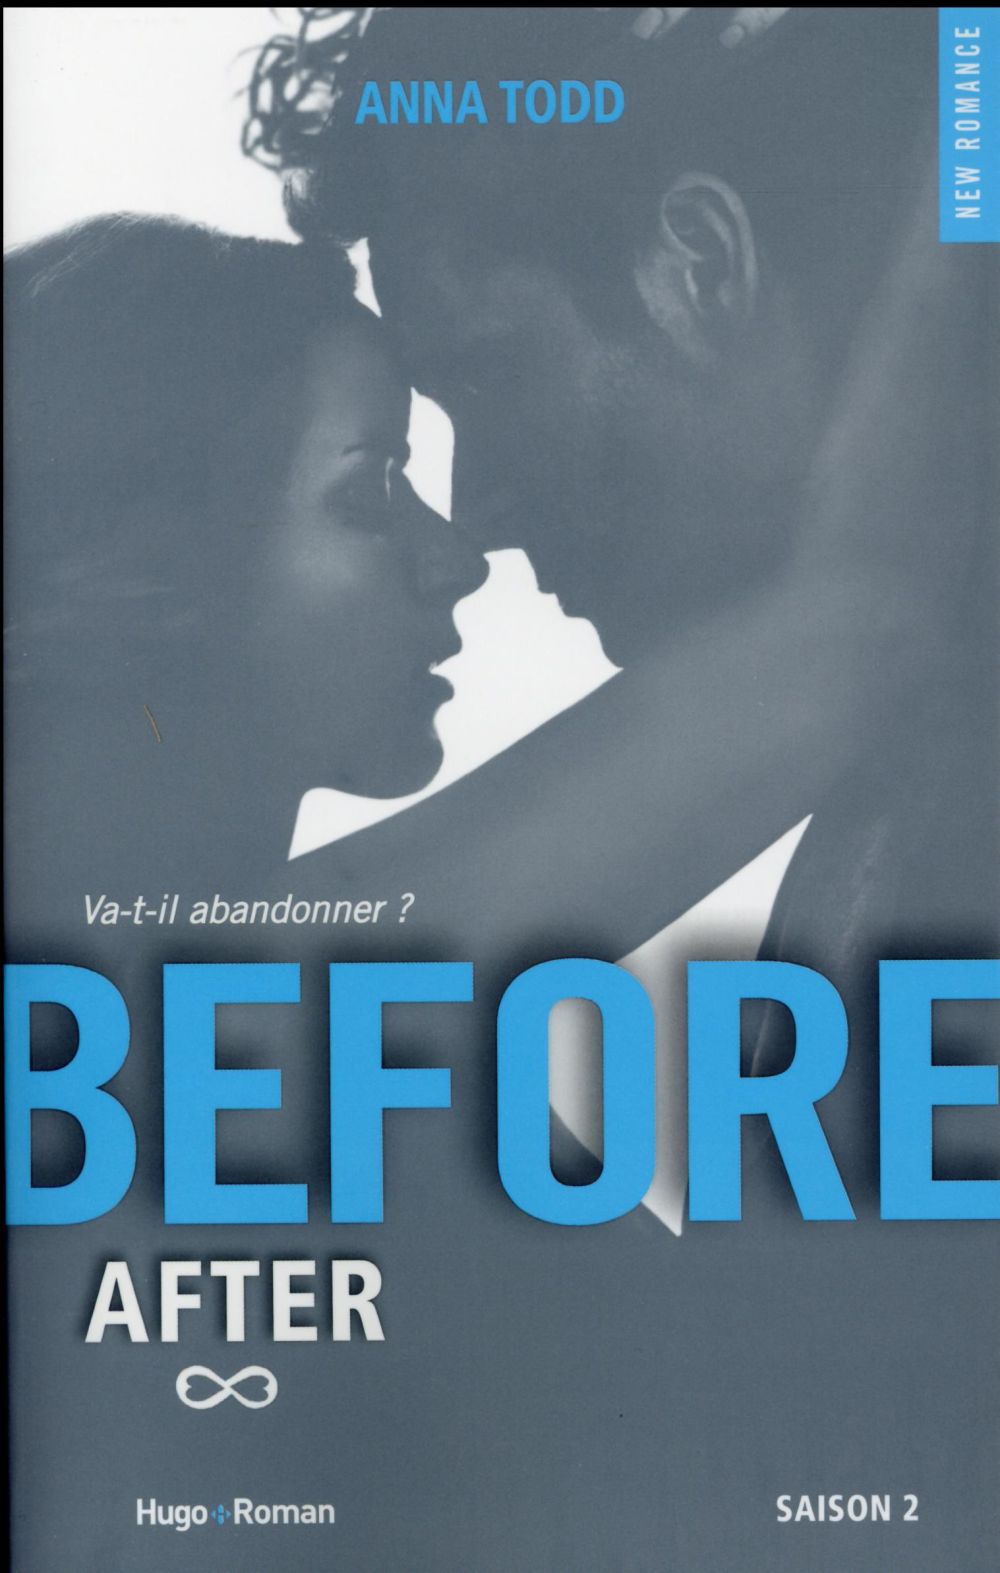 AFTER - BEFORE SAISON 2